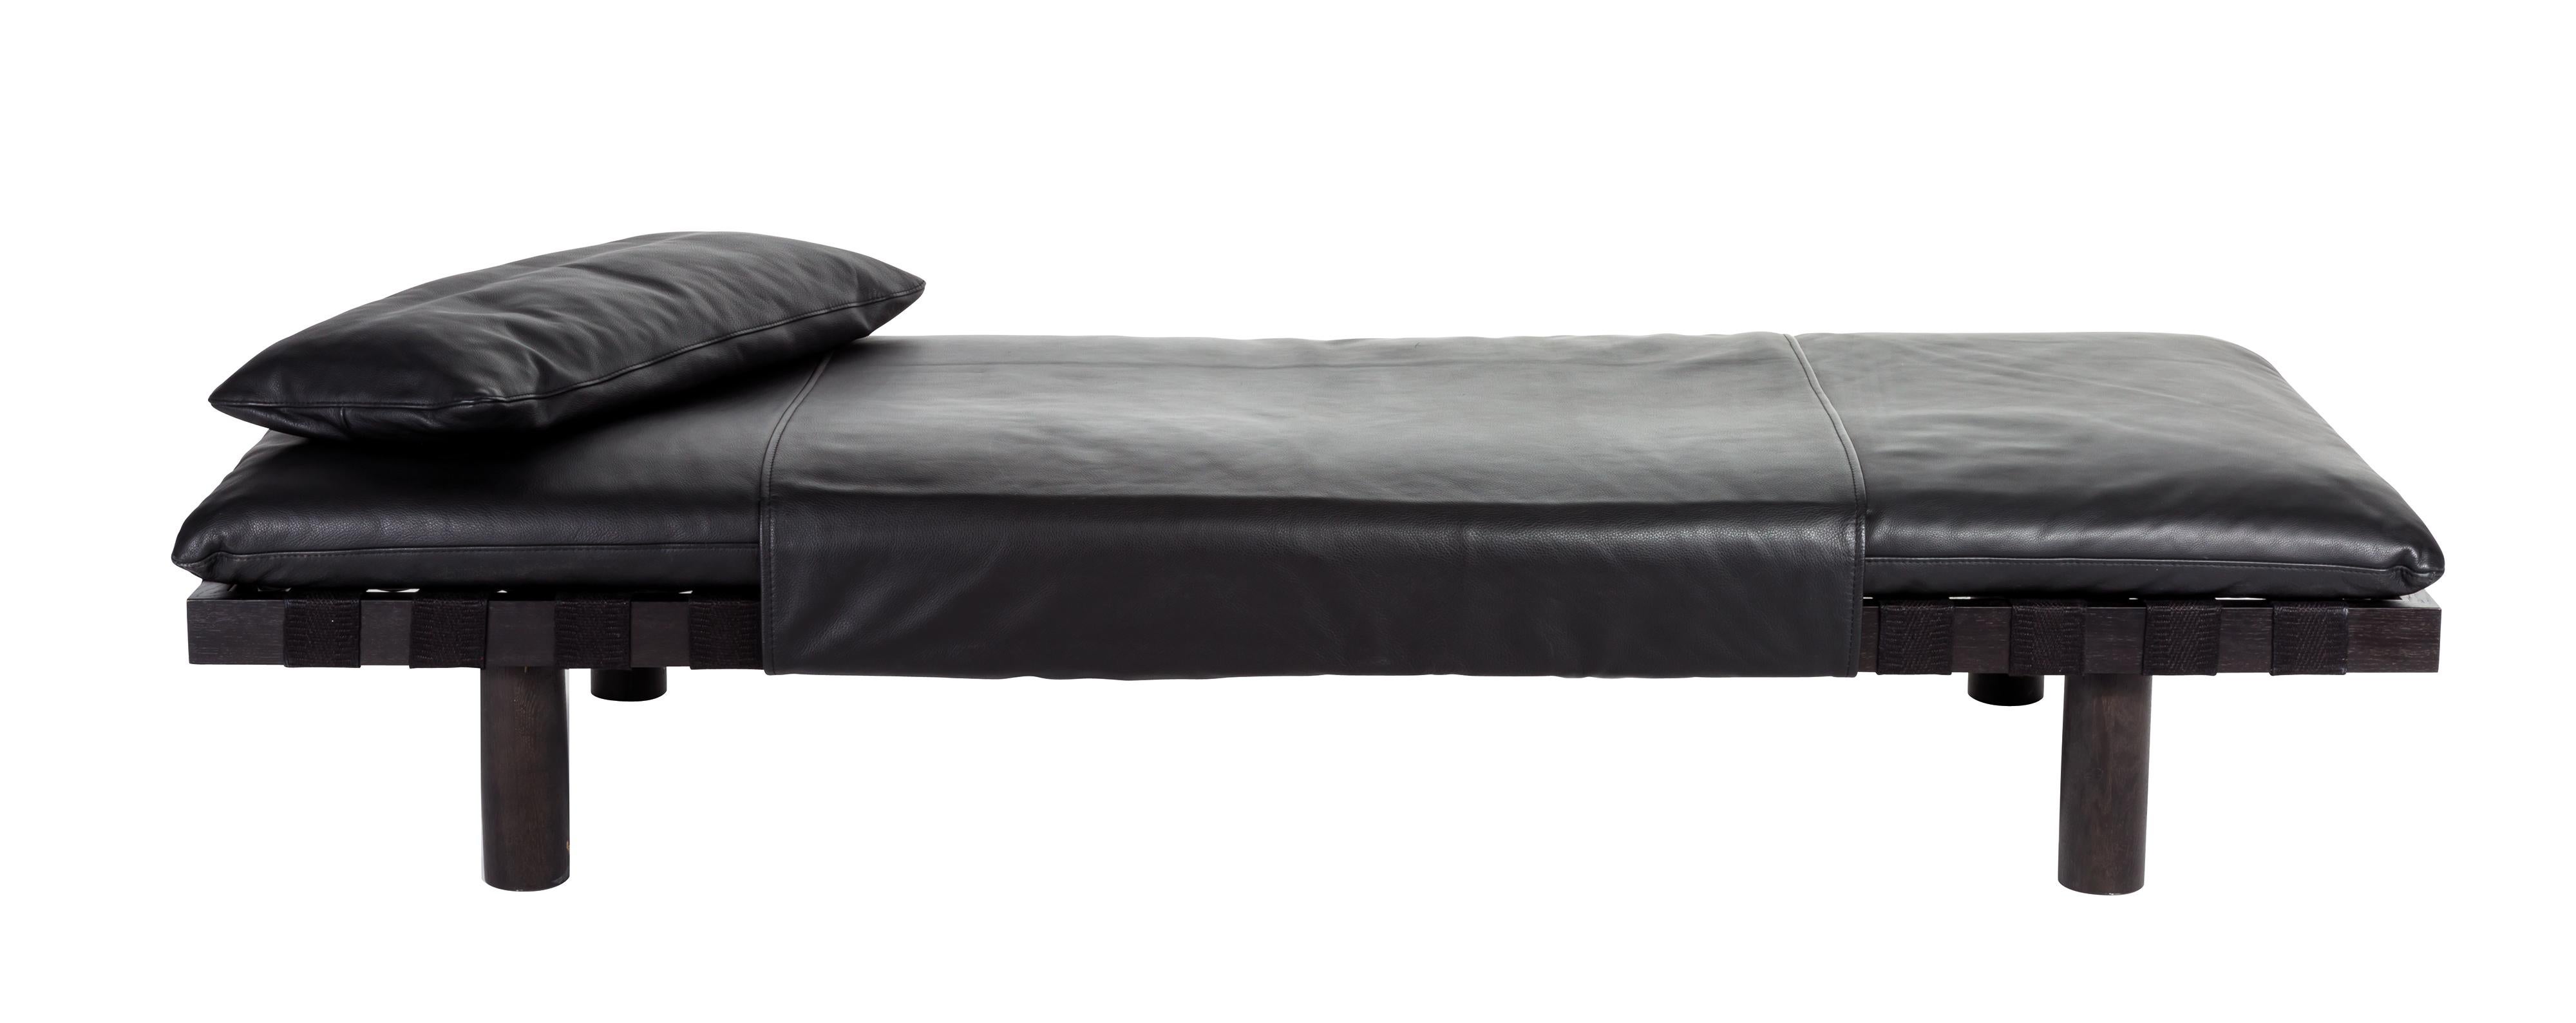 Pallet Black Leather Black Day Bed by Pulpo
Dimensions: D200 x W80 x H29 cm
Materials: fabric/leather, foam and wood

Also available in different colours and finishes. Please contact us.

Thinking about the first significant furniture for pulpo with